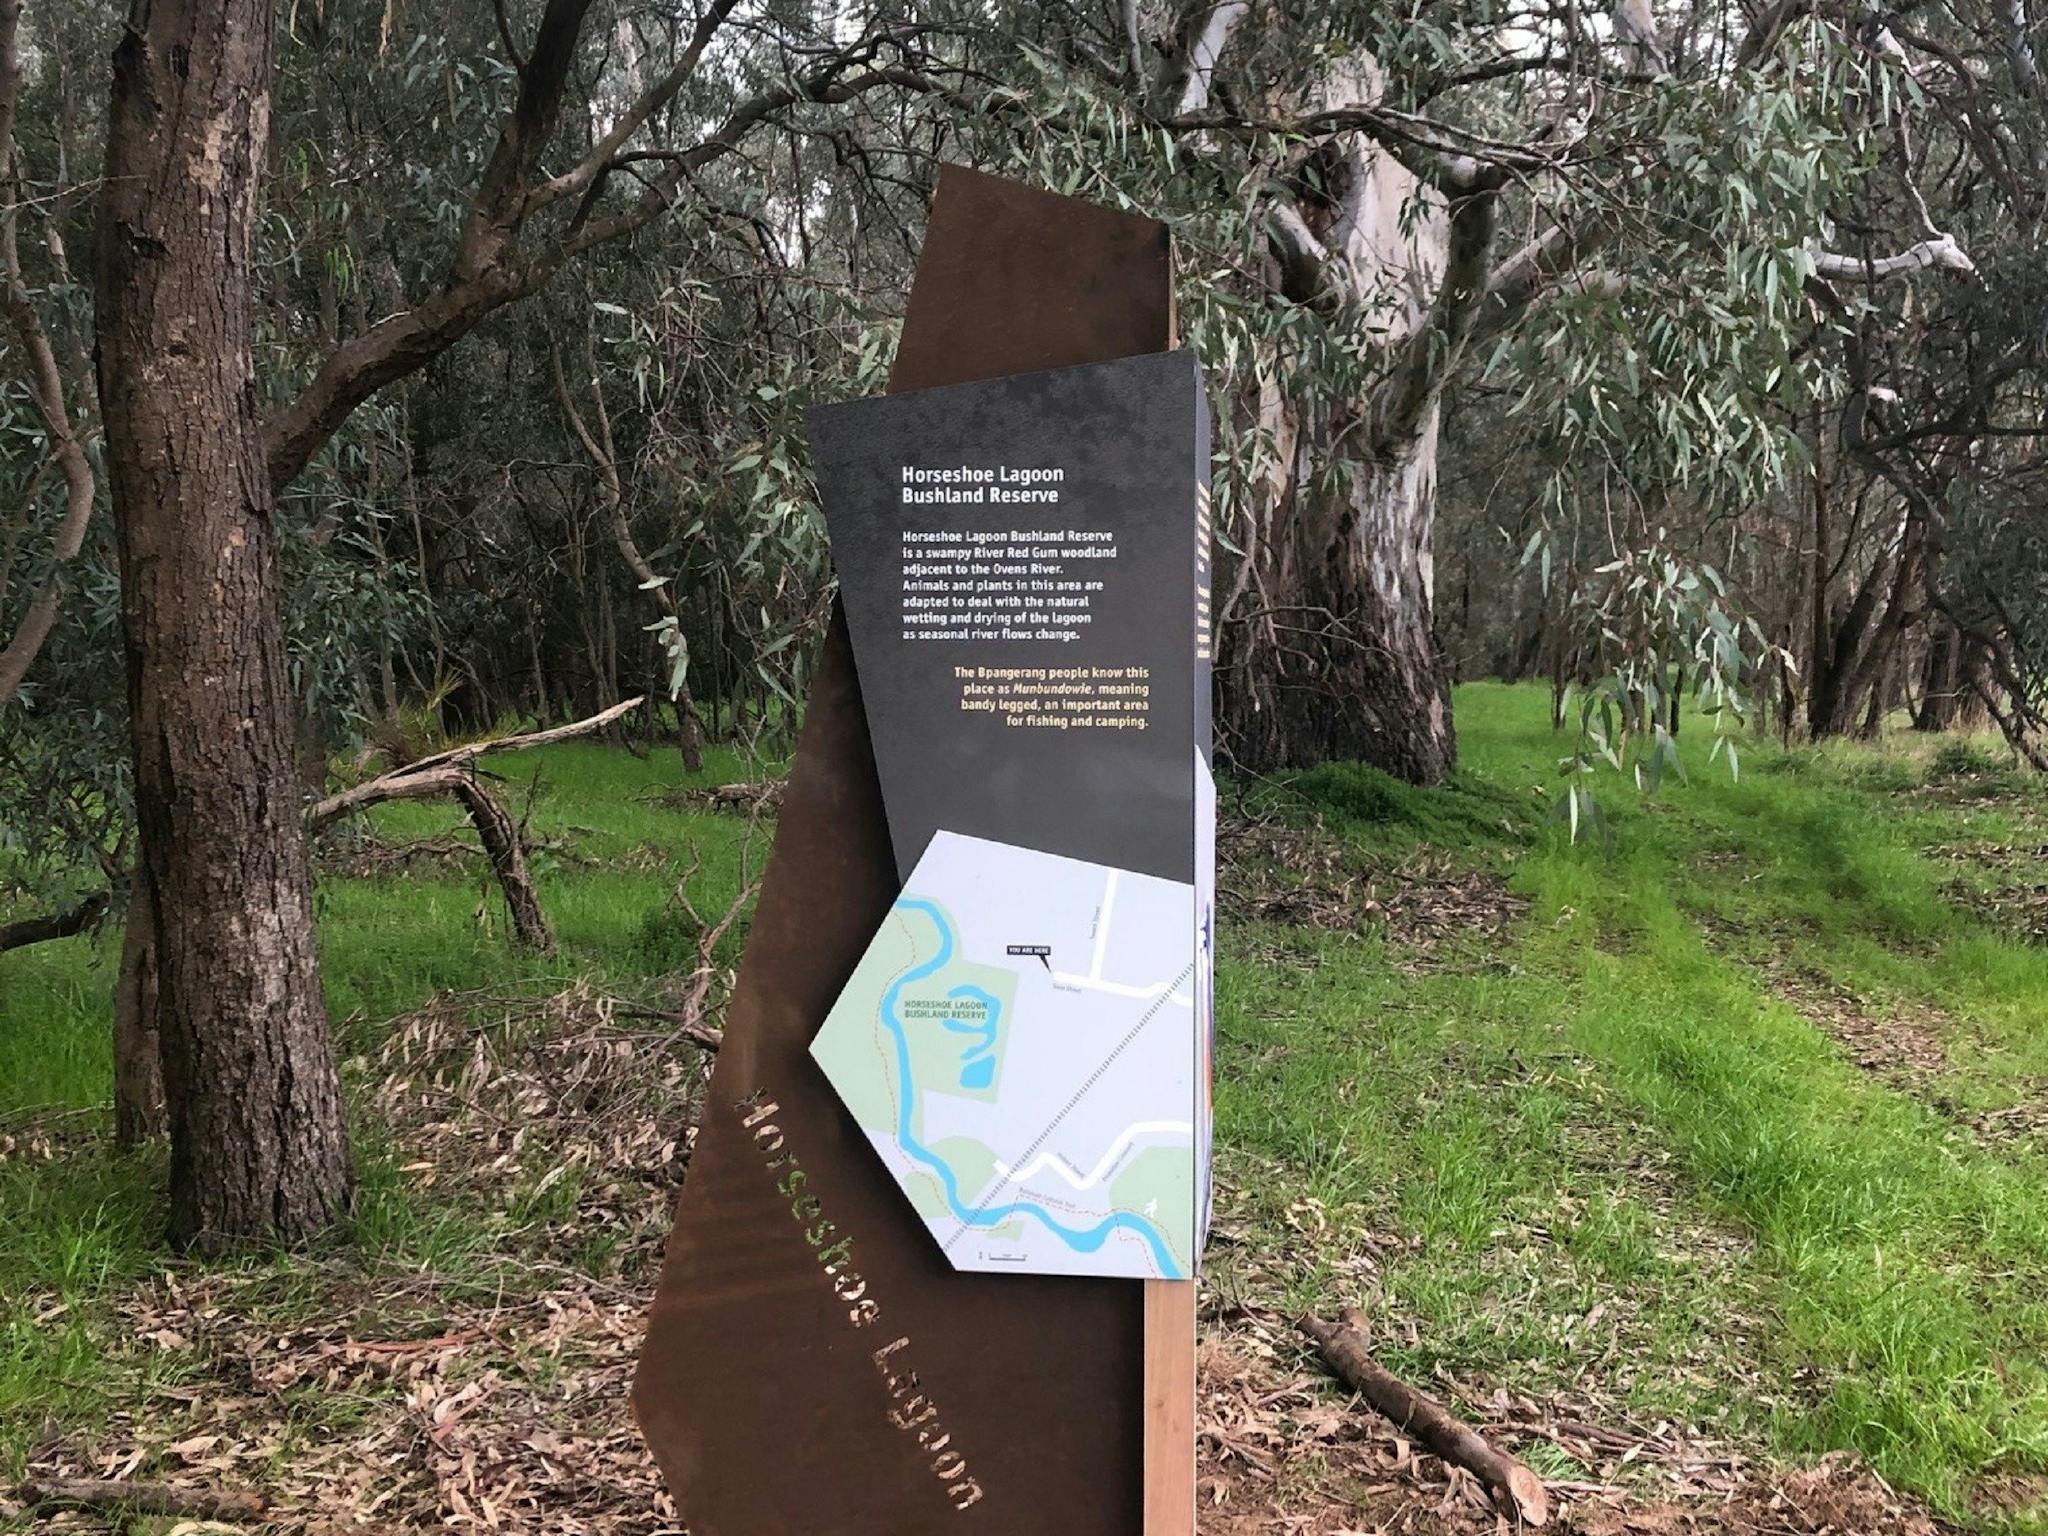 Directional sign showing map and giving information on the reserve, green grass, river red gums,